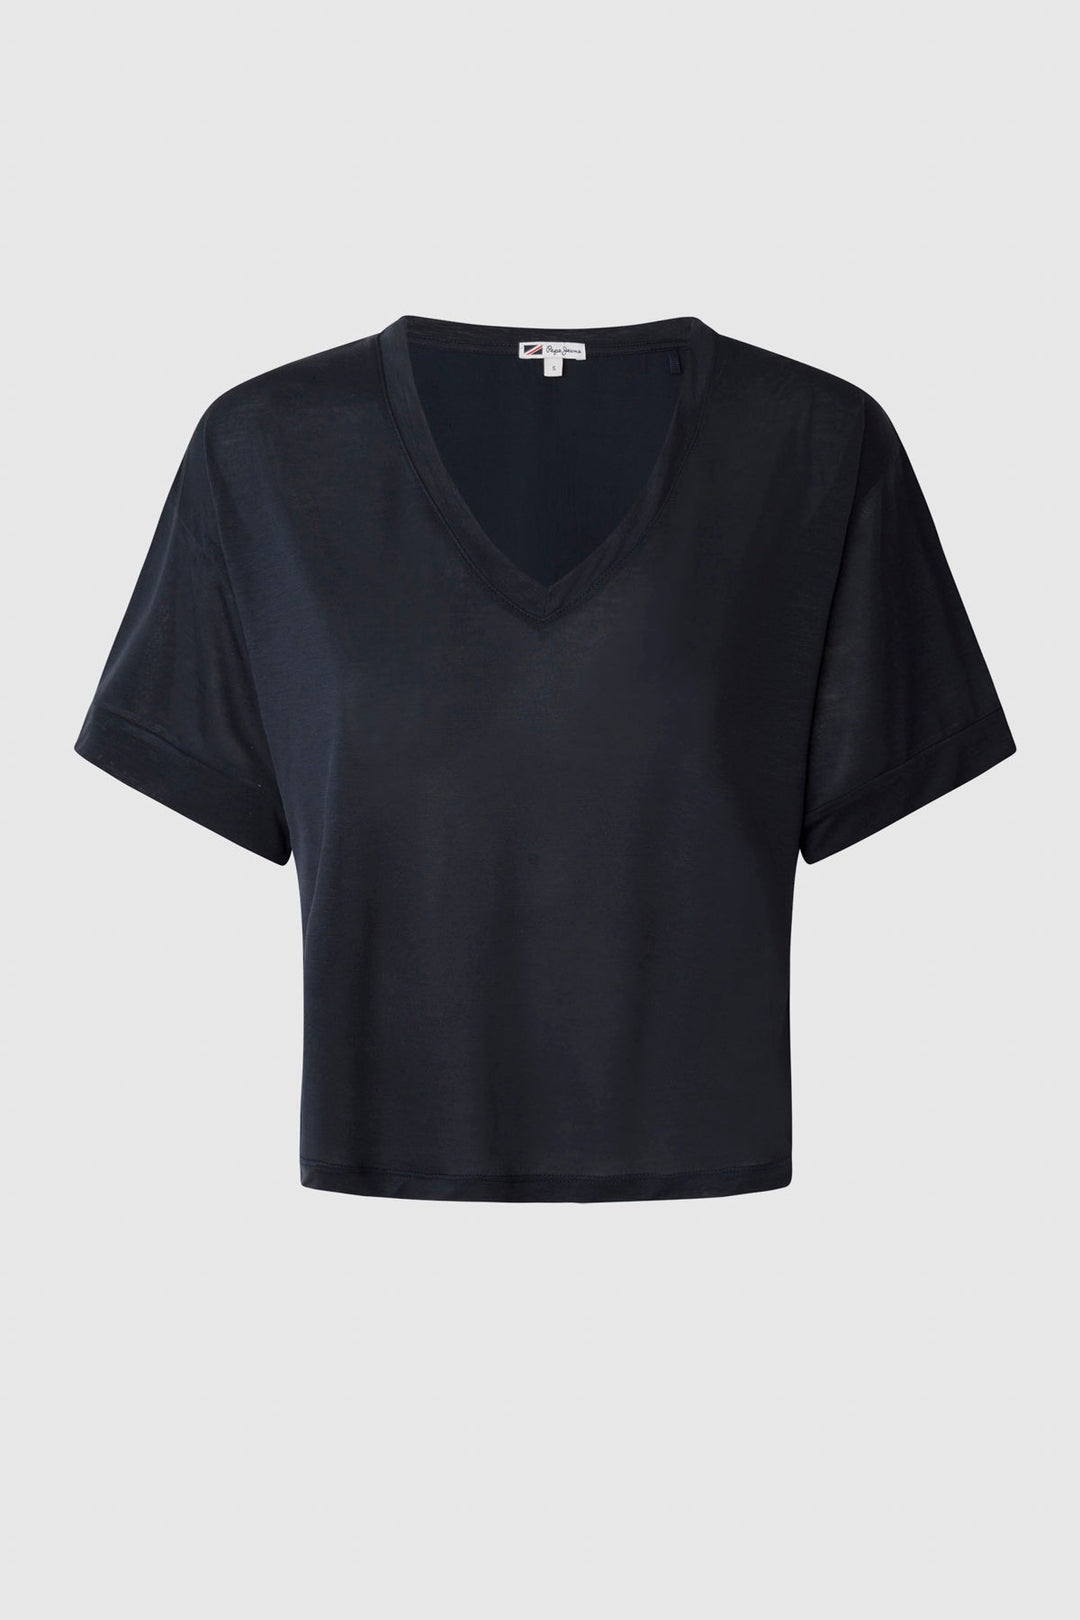 MARIAN V NECK DULWICH - Pepe Jeans